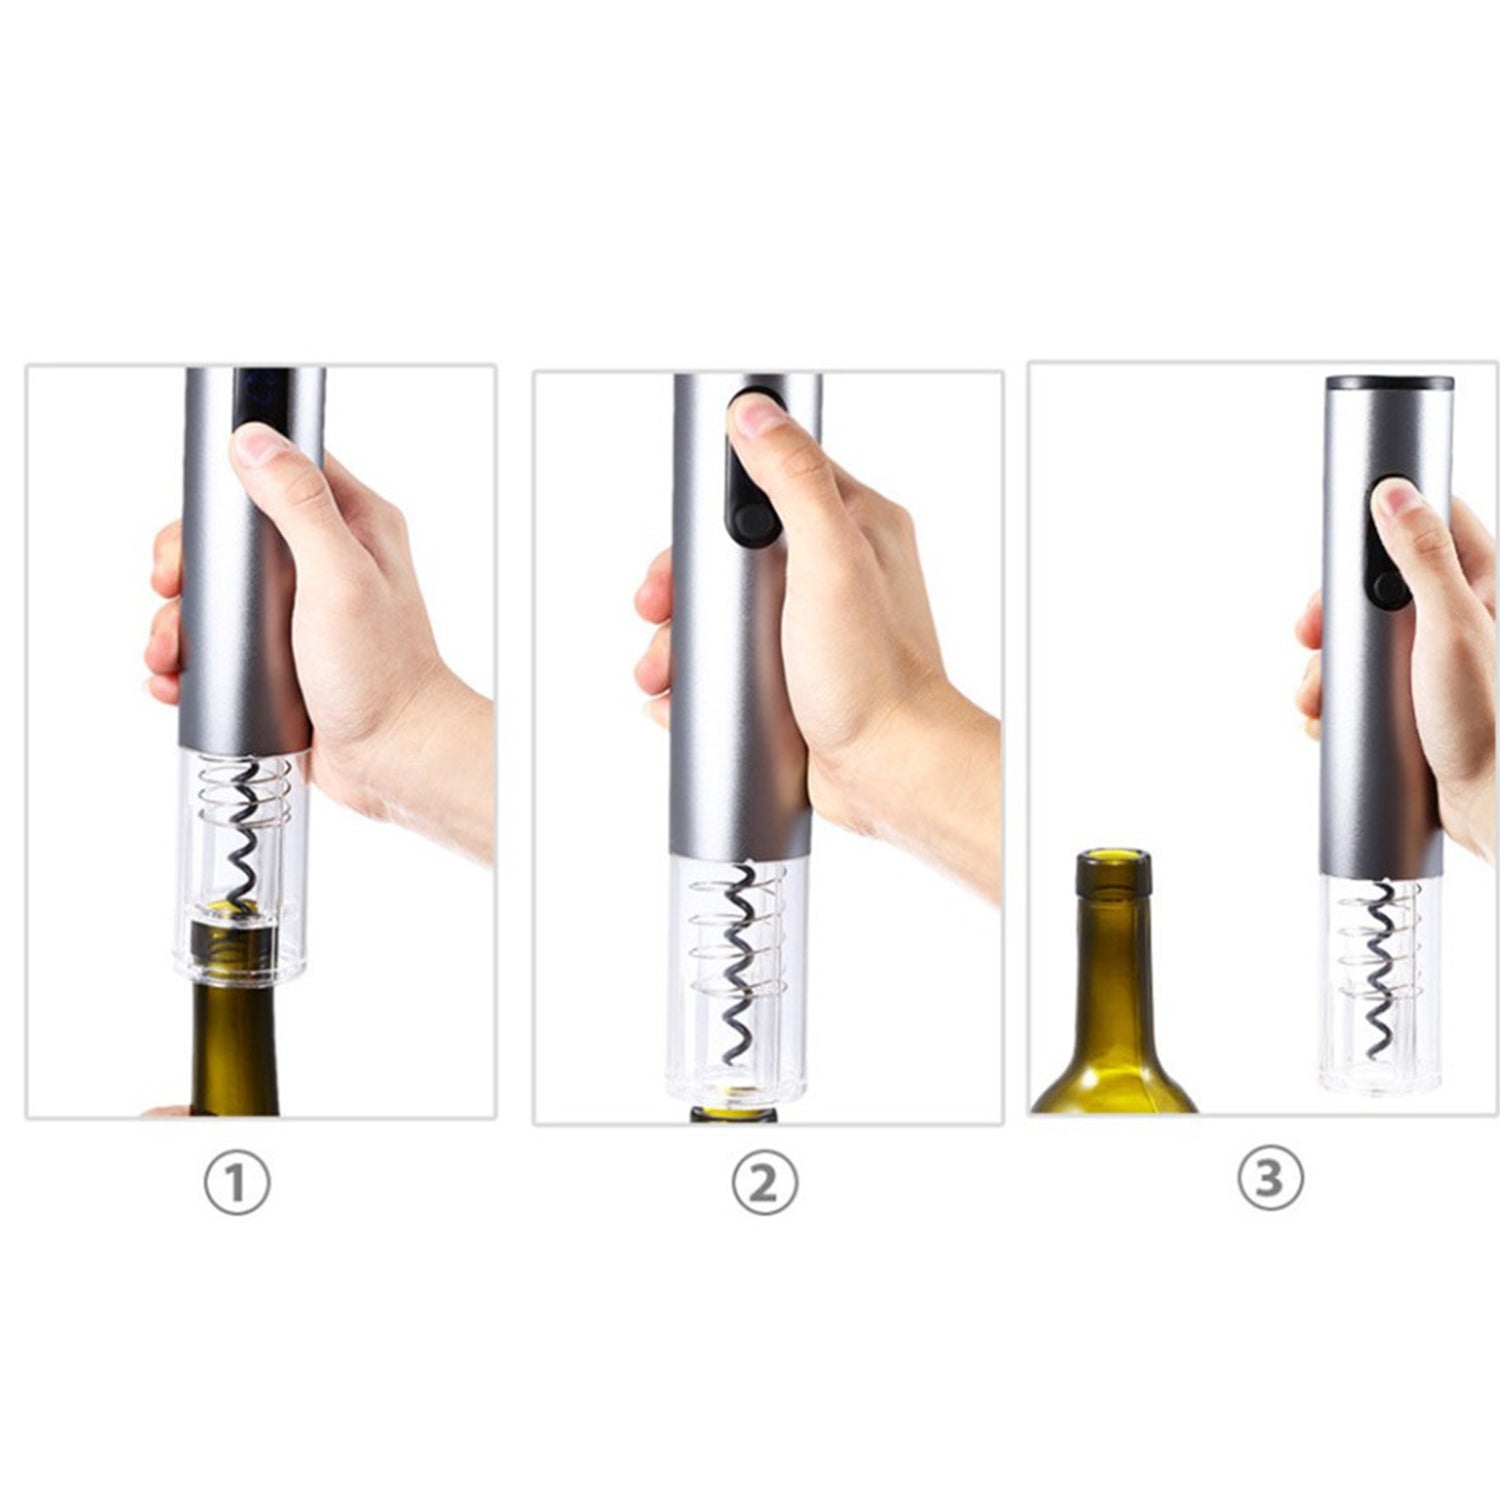 Professional Red Wine Opener Foil Cutter Set For Kitchen Tool Dry Battery Electric Wine Opener Automatic Bottle Opener Corkscrew